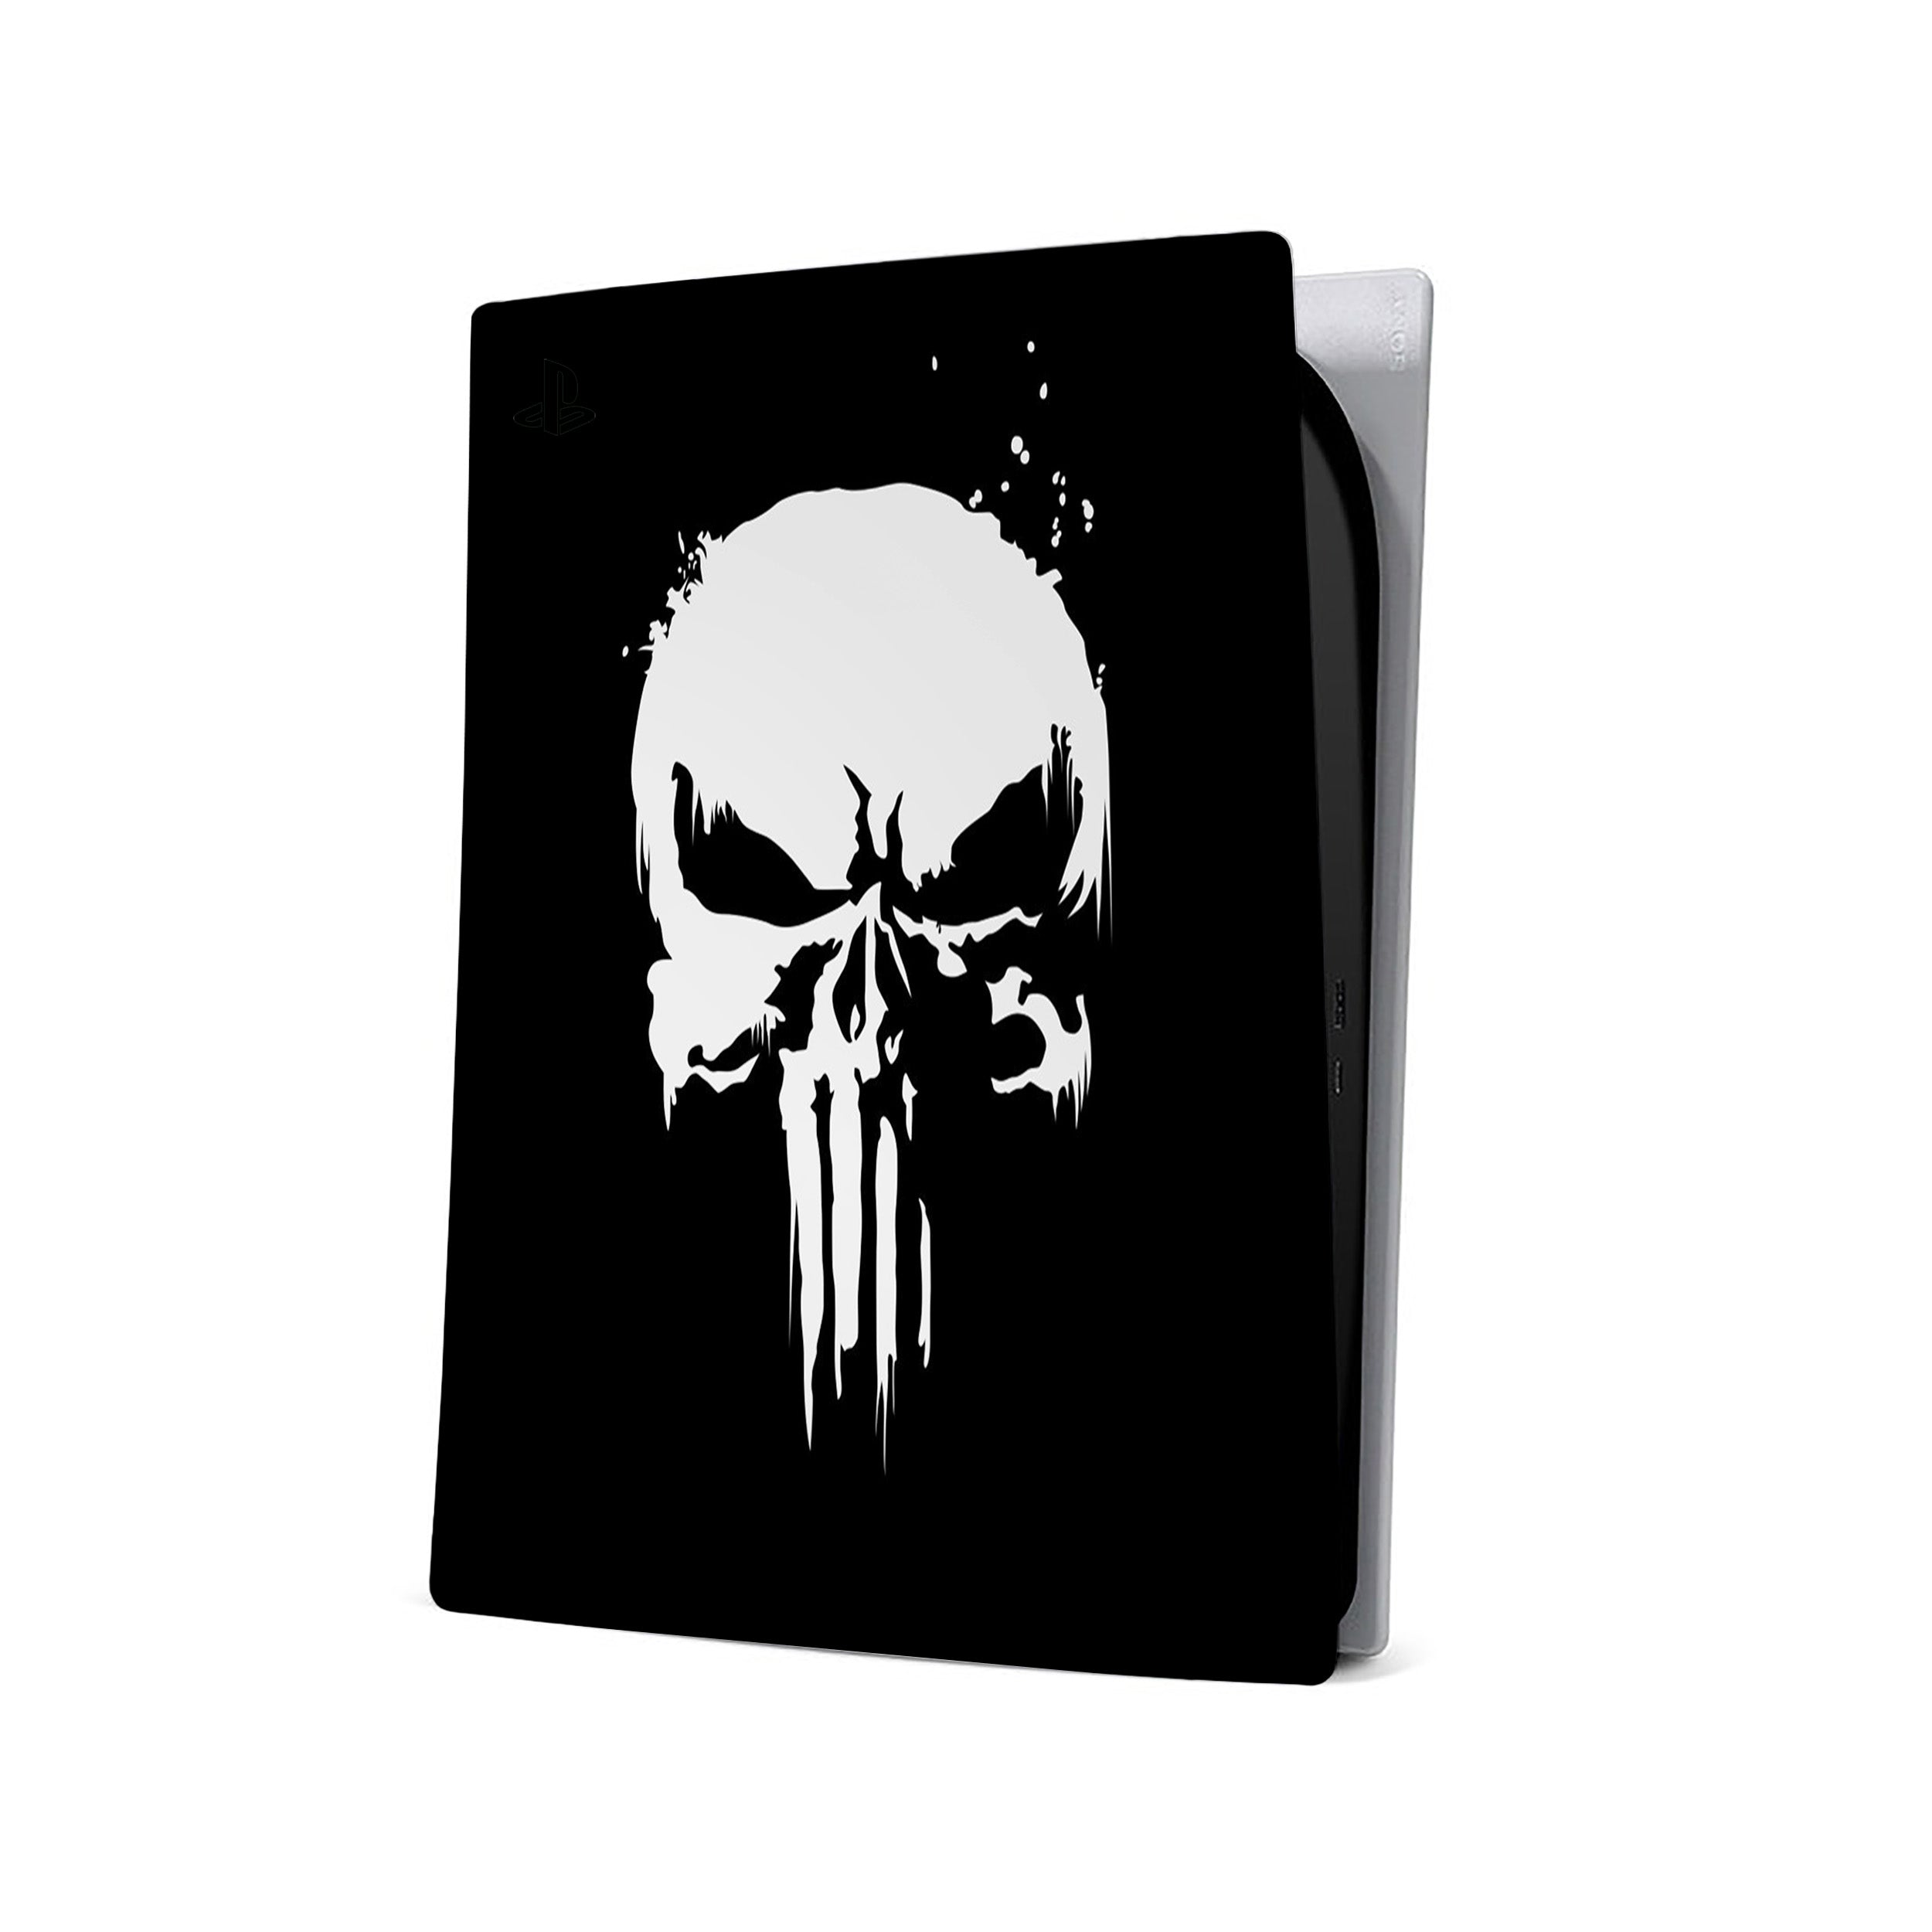 A video game skin featuring a Marvel The Punisher design for the PS5.